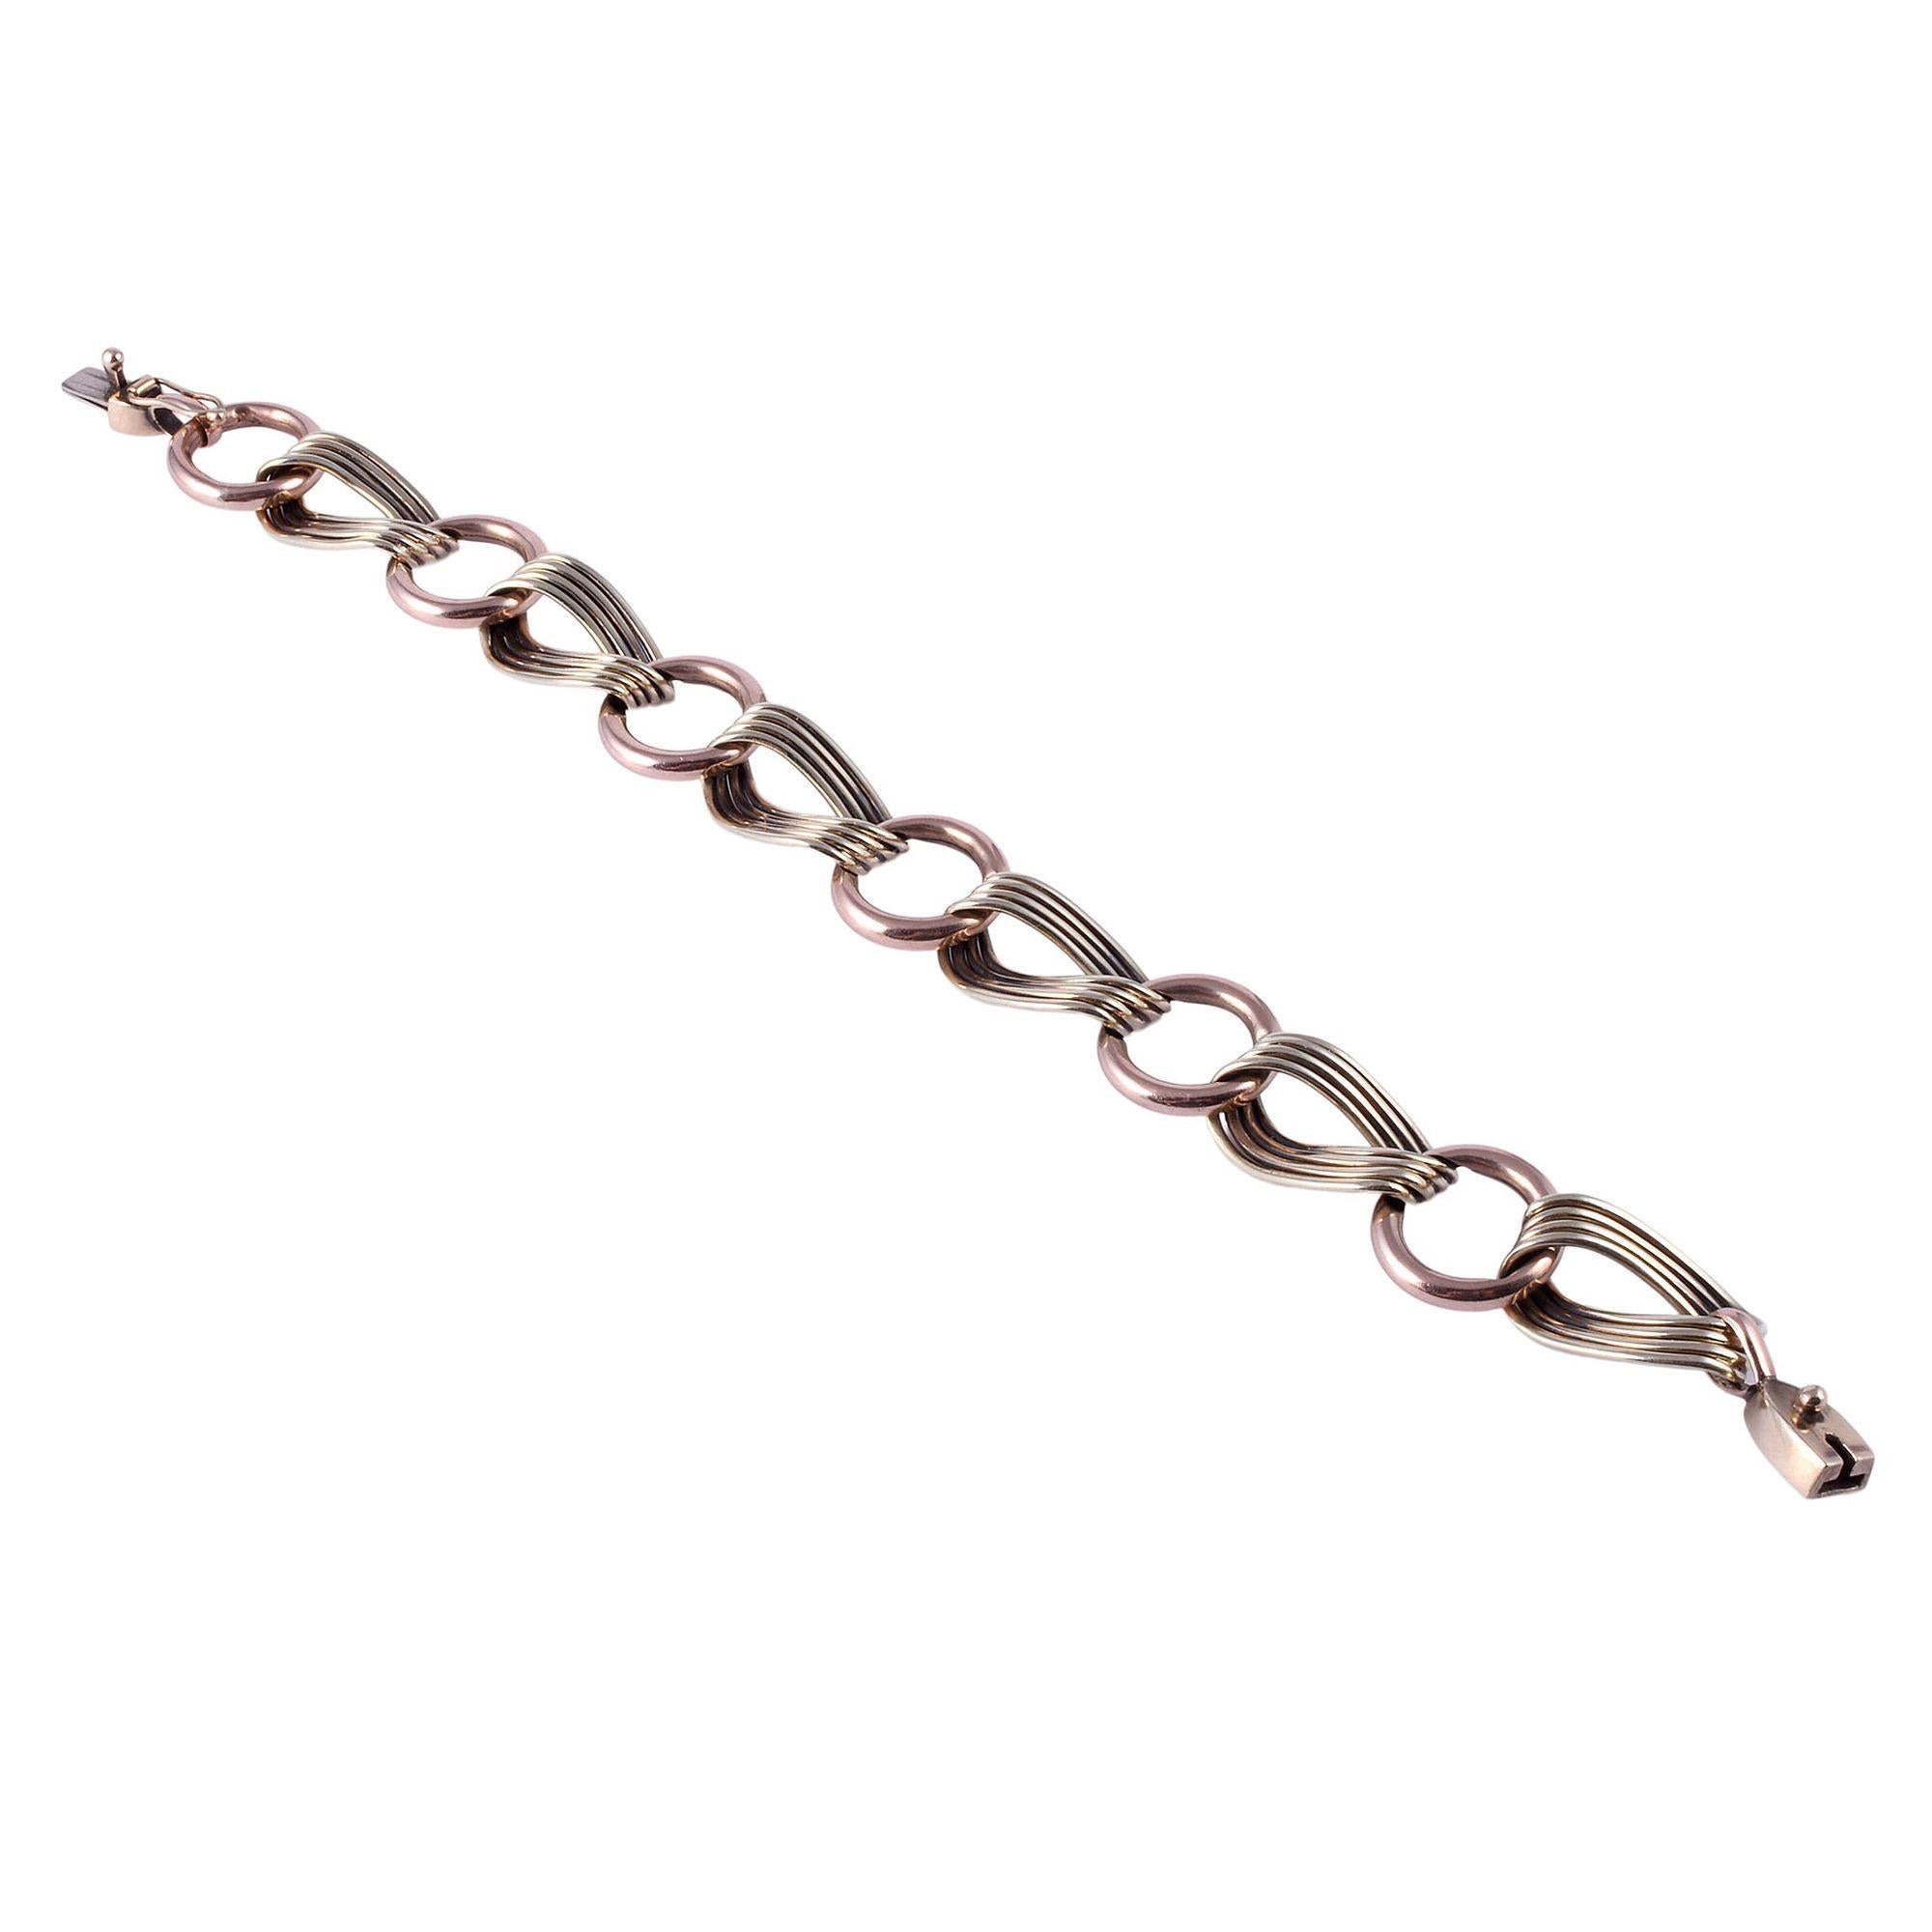 Antique rose & yellow gold link bracelet, circa 1900. This antique bracelet is crafted in 14 karat yellow and rose gold. The antique link bracelet weighs 24 grams. [KIMH 584]

Dimensions
7.875